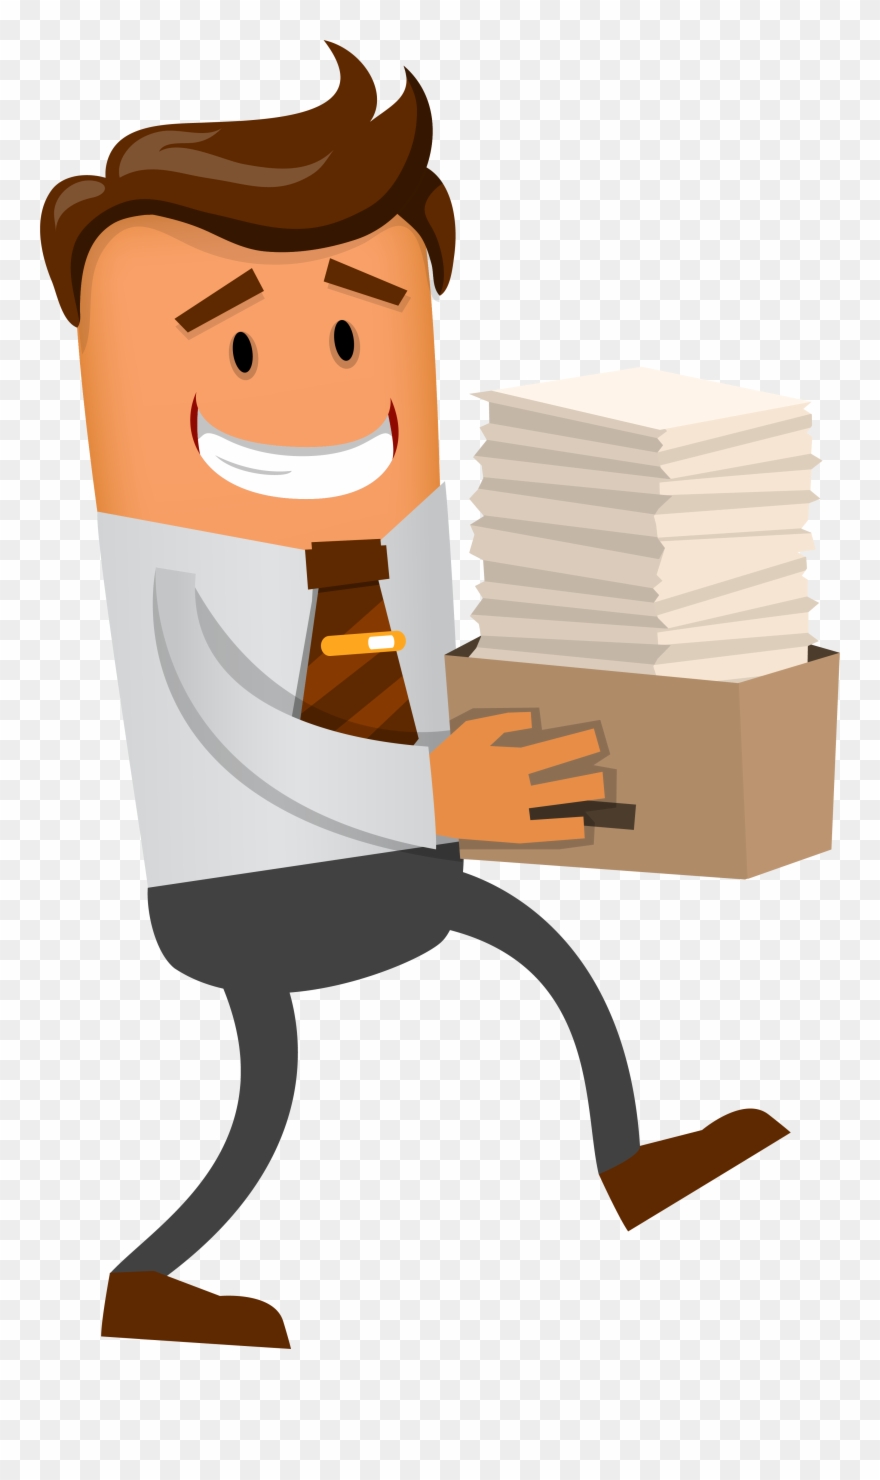 Record clipart paper record. Carrying may keeping 